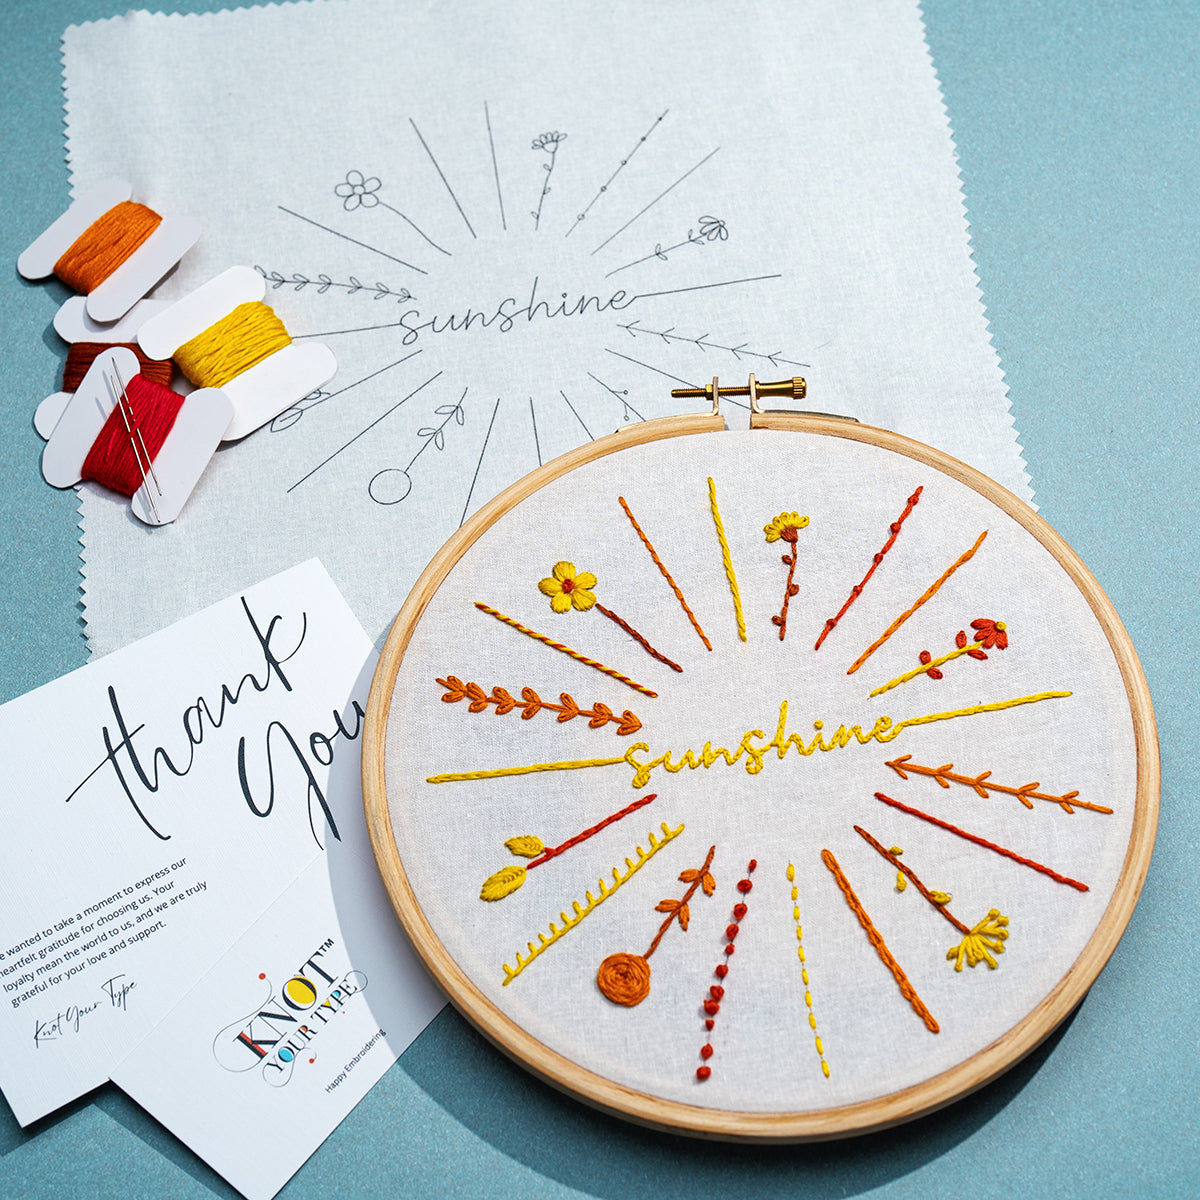 Beginner's Friendly Embroidery Stitches Learning Kit - Sunshine